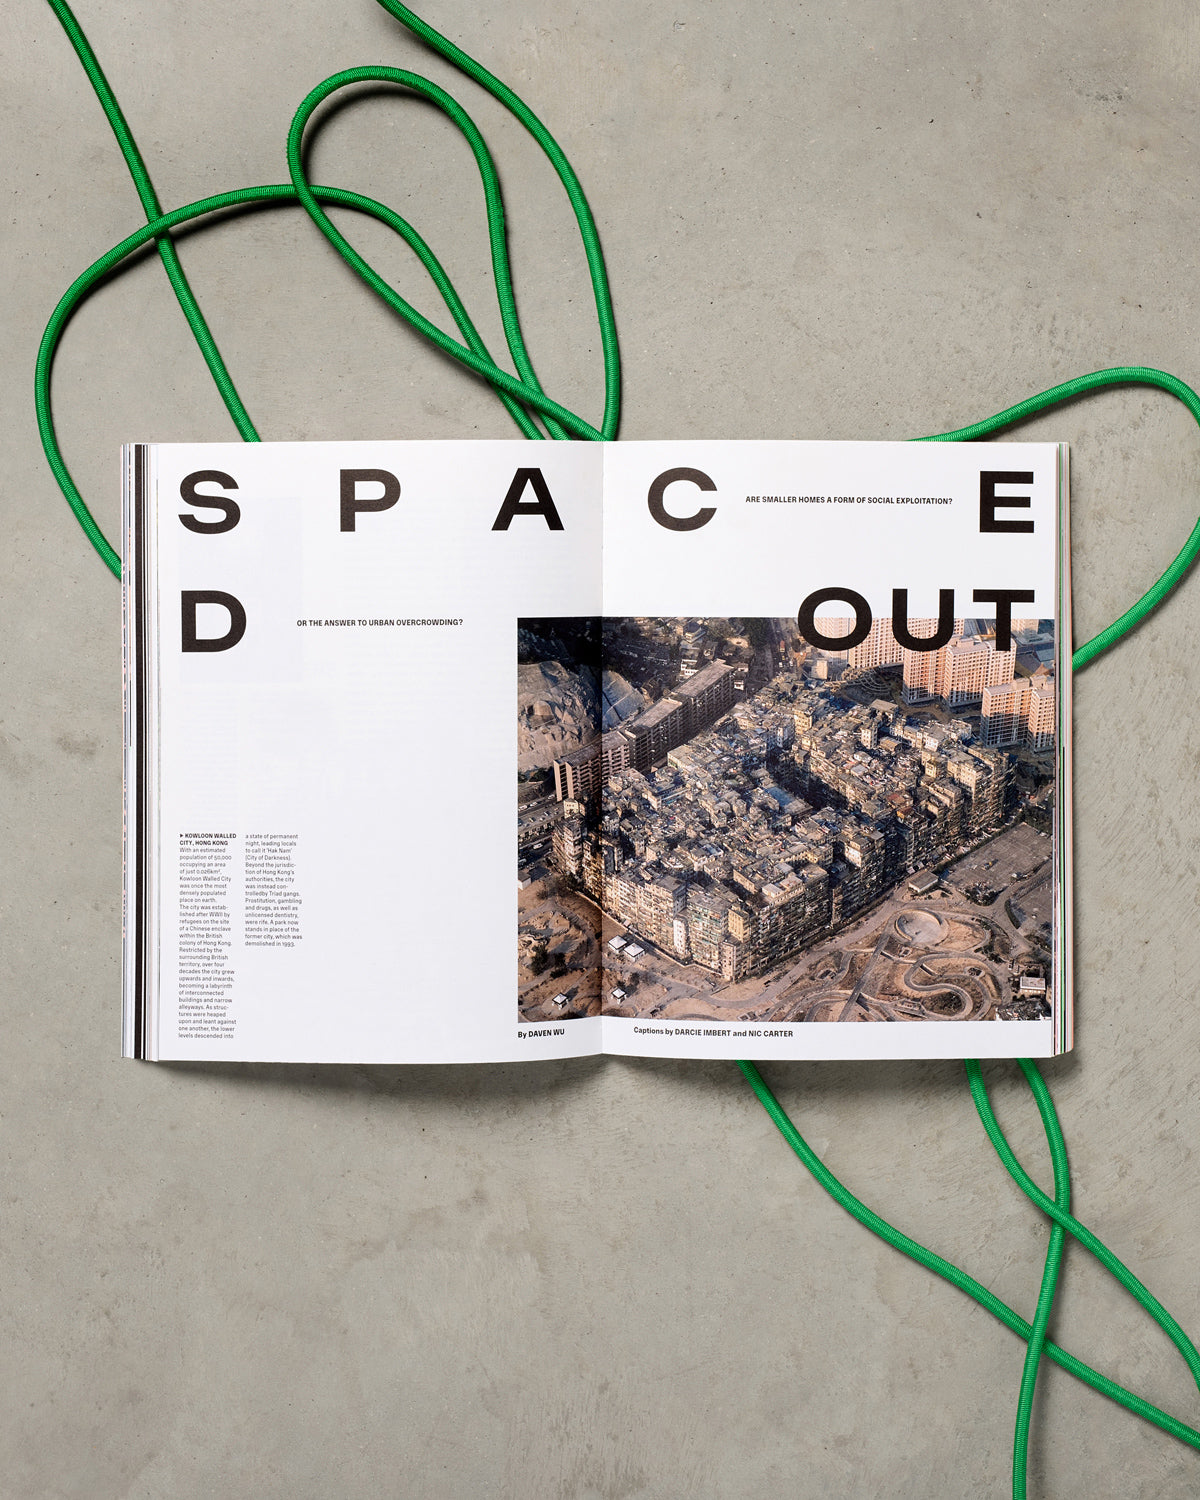 Sociotype Journal #3 Home